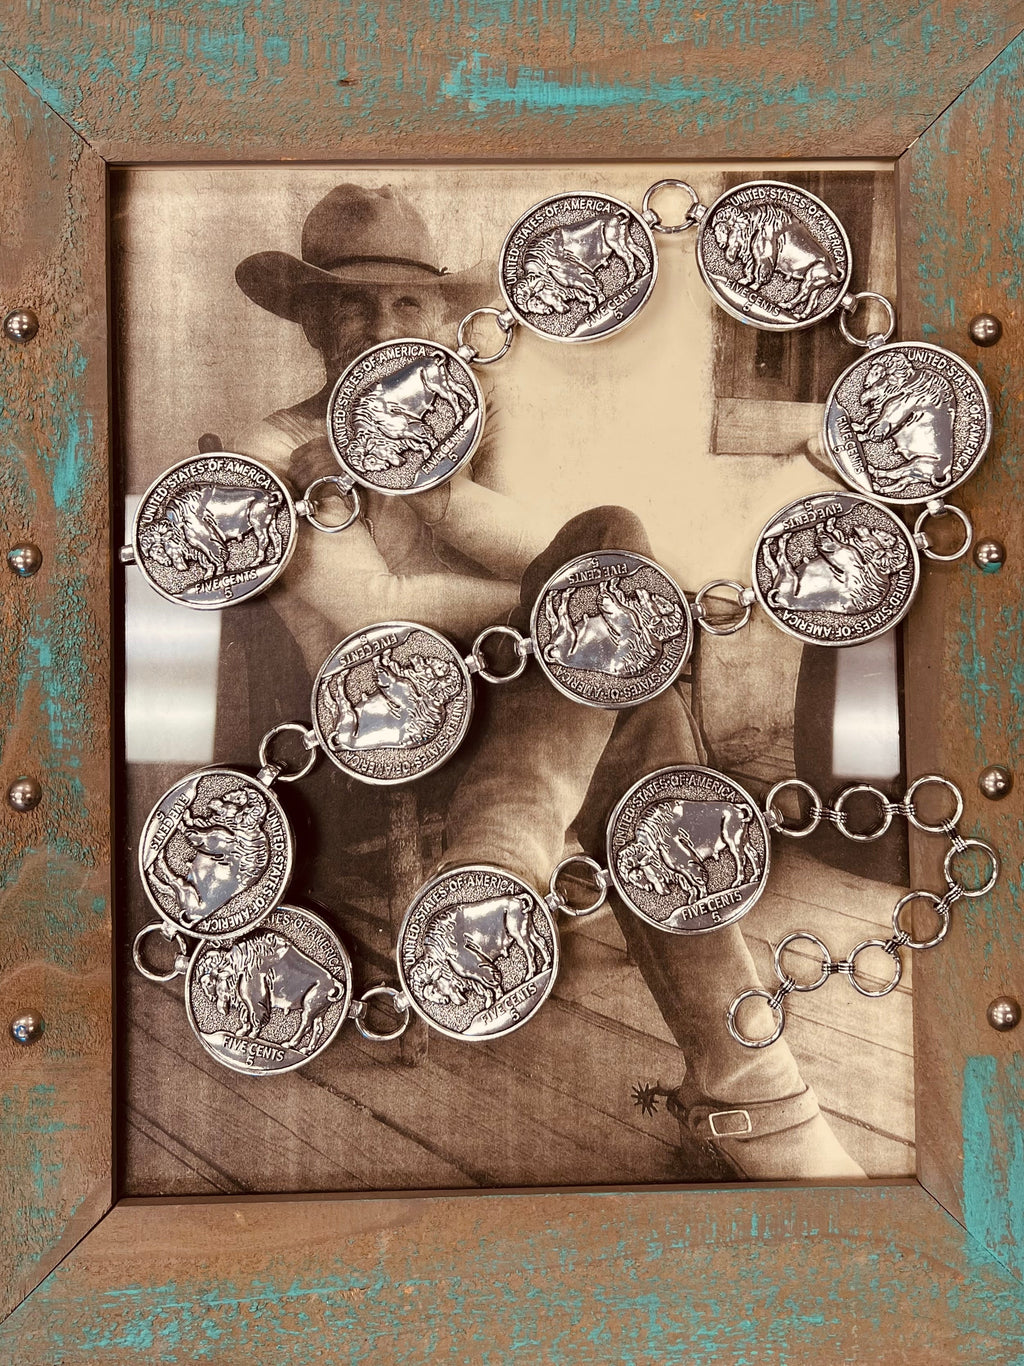  Buffalo Nickel, Concho, Belt, Silver, Western. Get Gussied Up. Small Business. Woman Owned Boutique. 